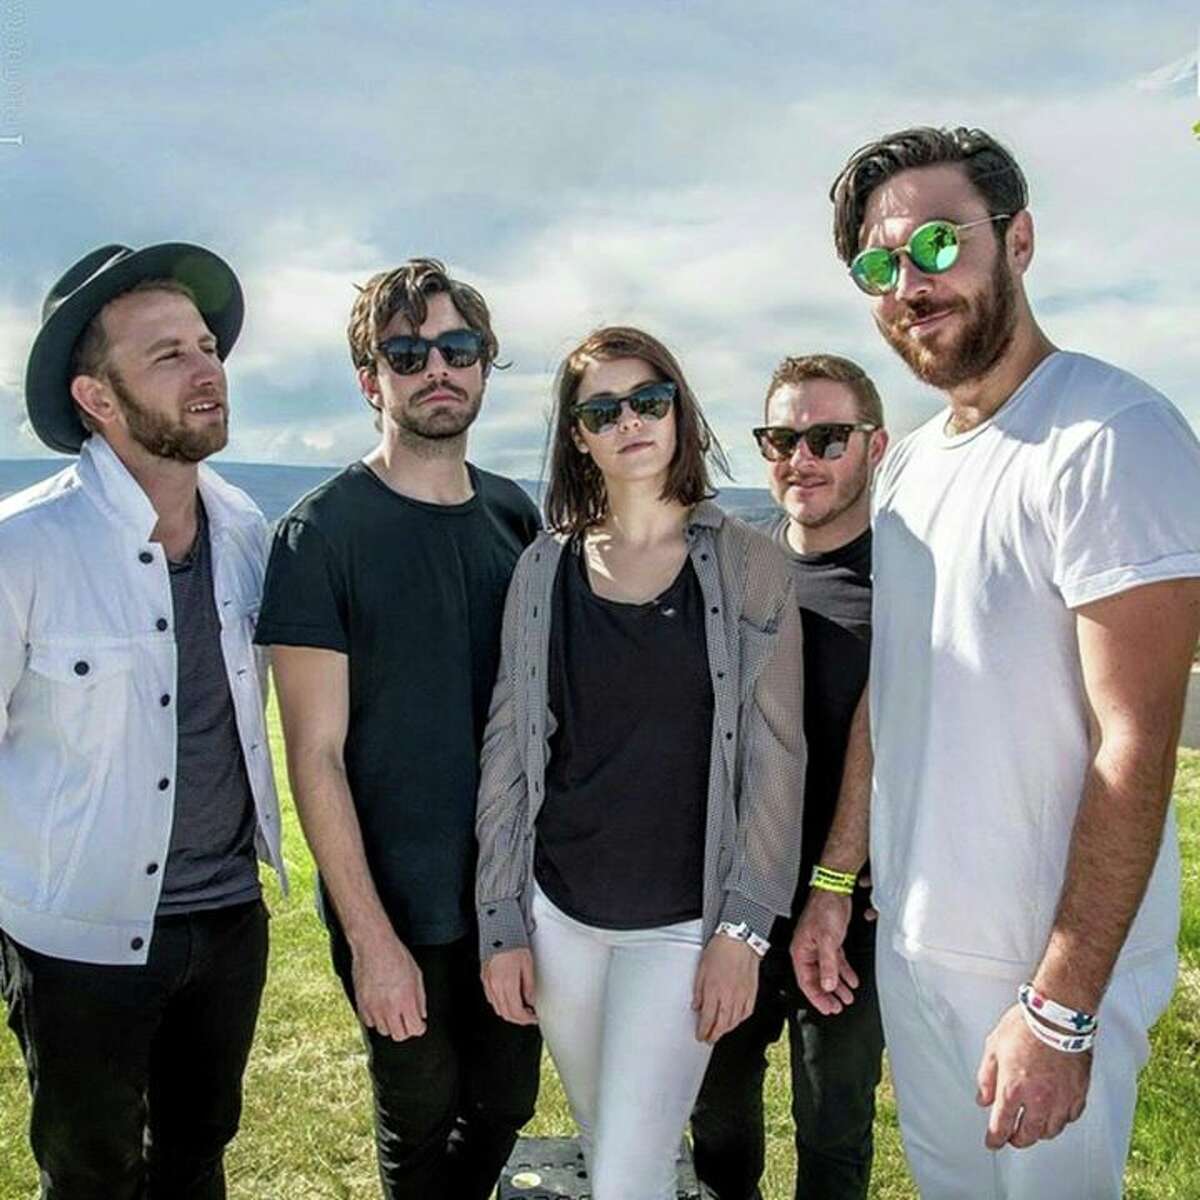 Indie pop band from L.A. Milo Greene. Where: The Hollow Bar & Kitchen, 79 North Pearl St., Albany When: Friday, June 12, 9 p.m. Get tickets here.